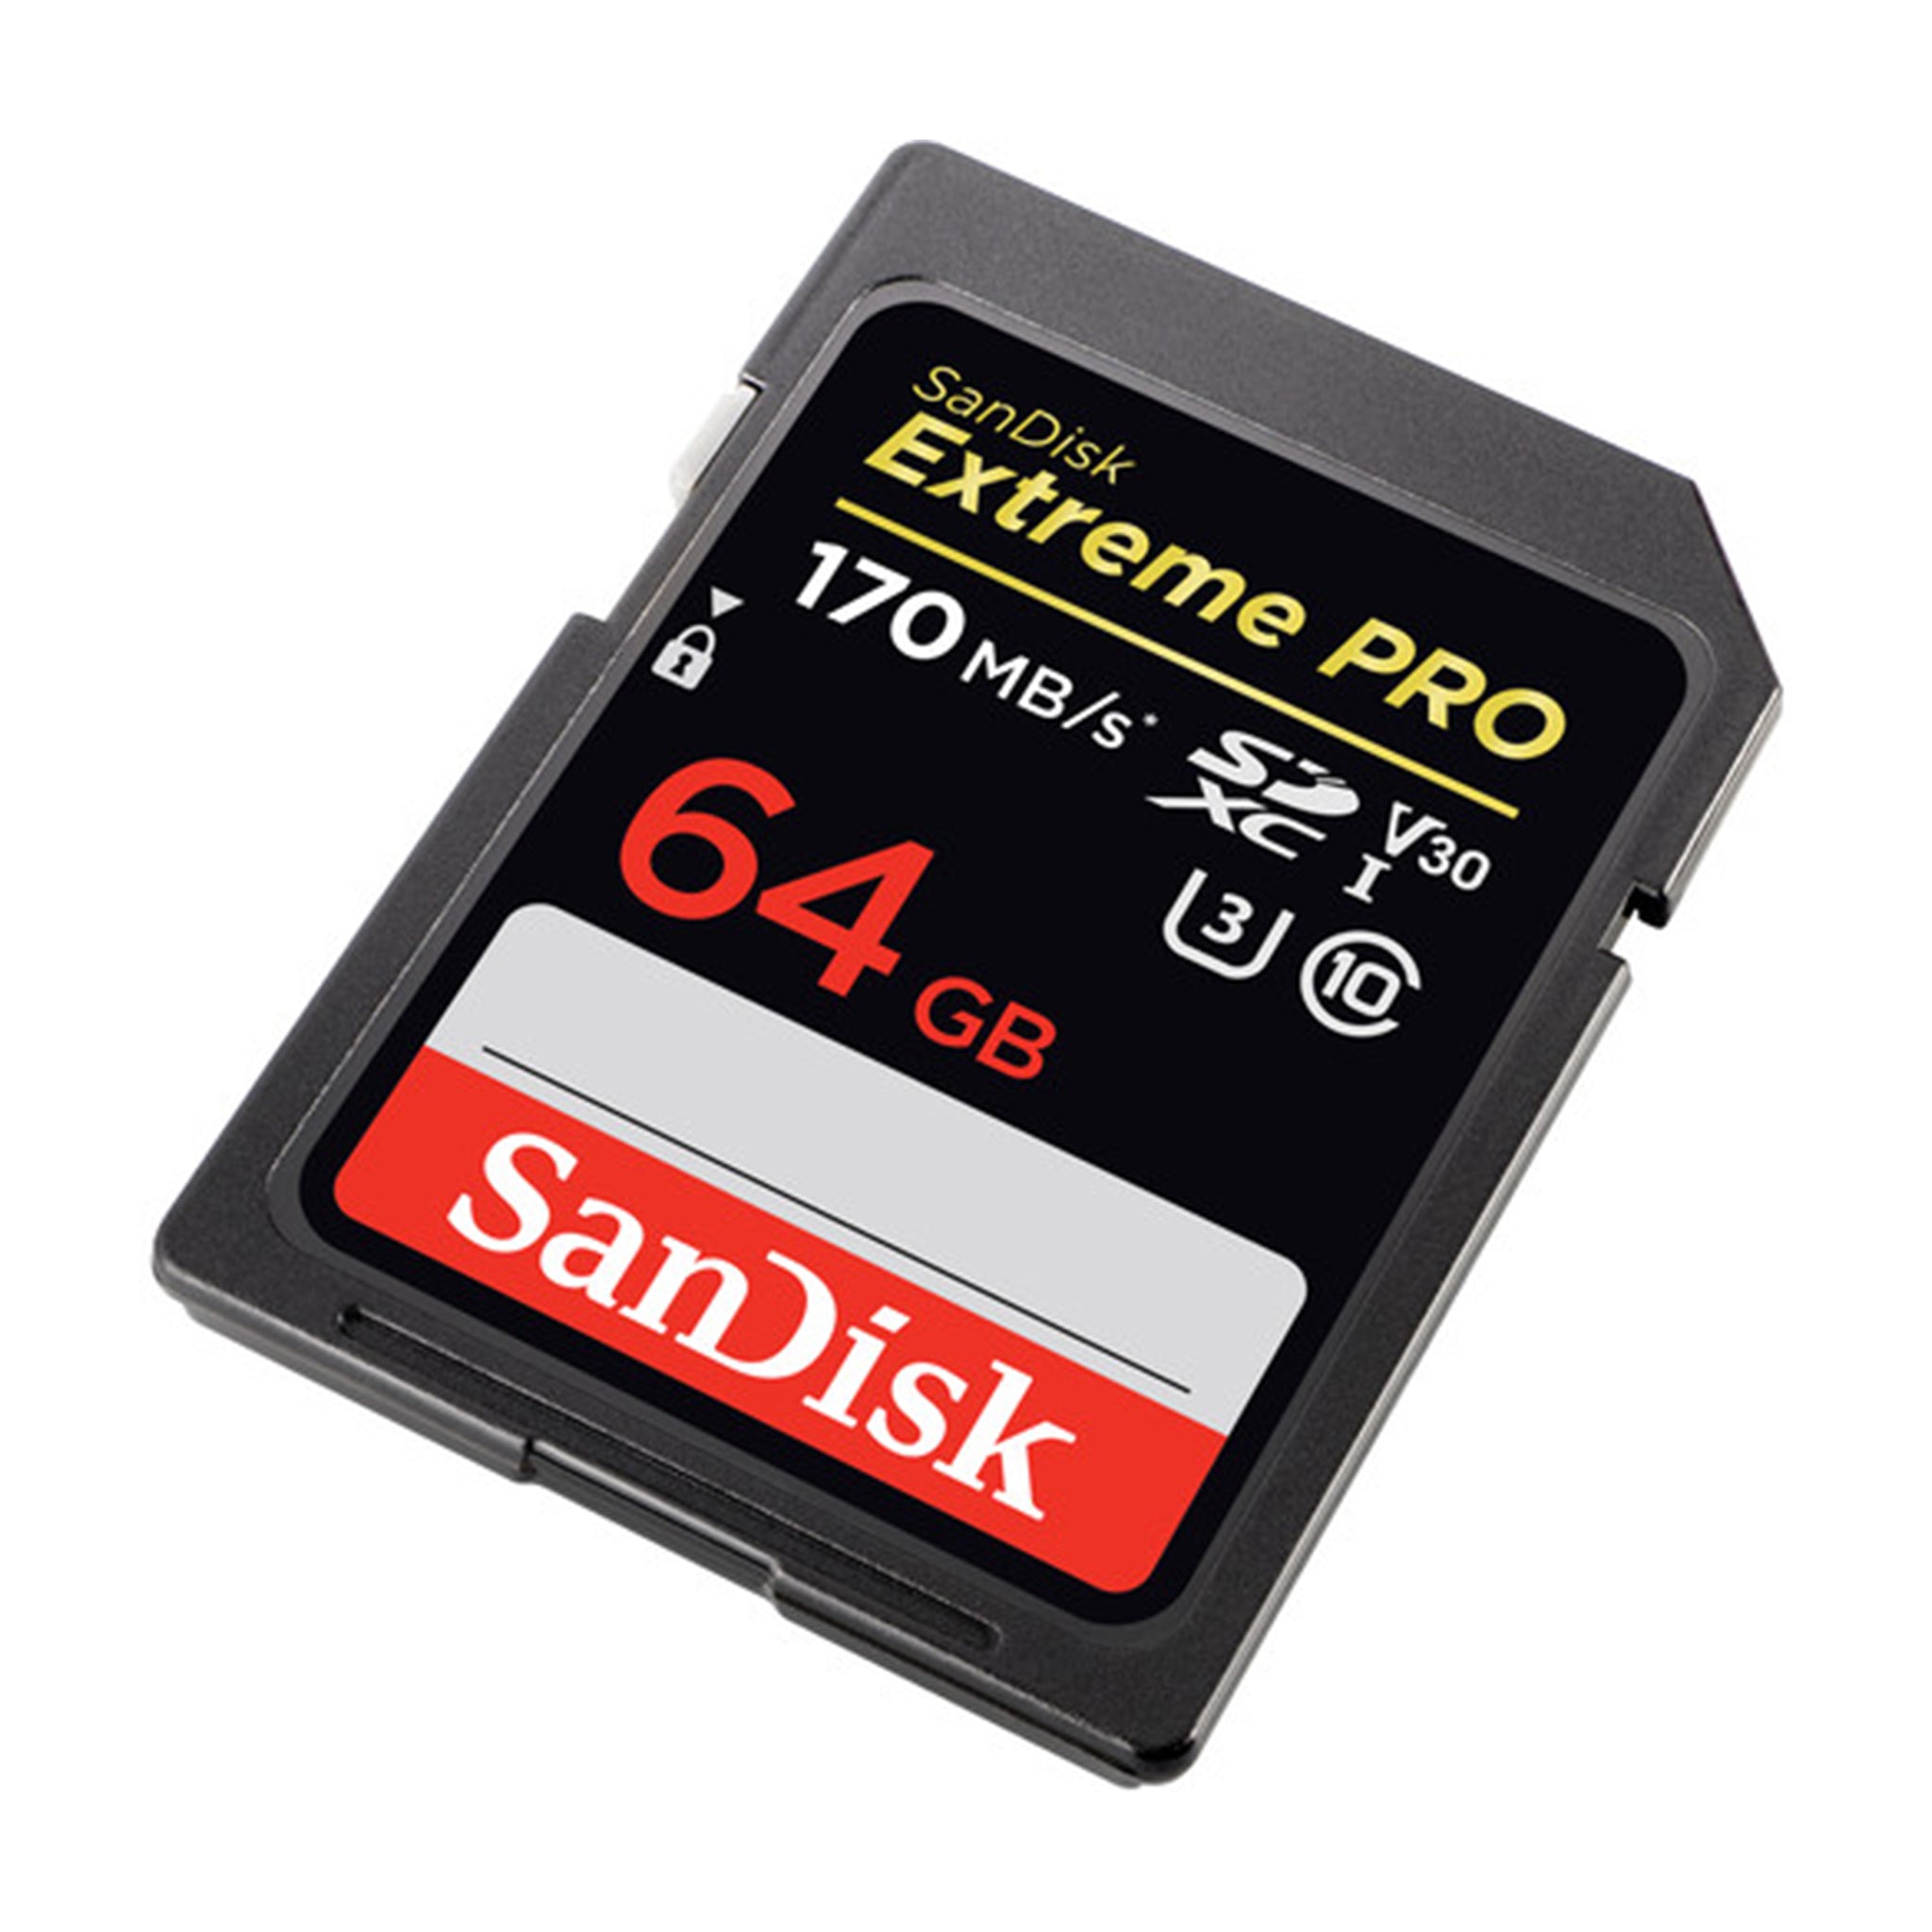 SanDisk 64GB Extreme Pro SD Card